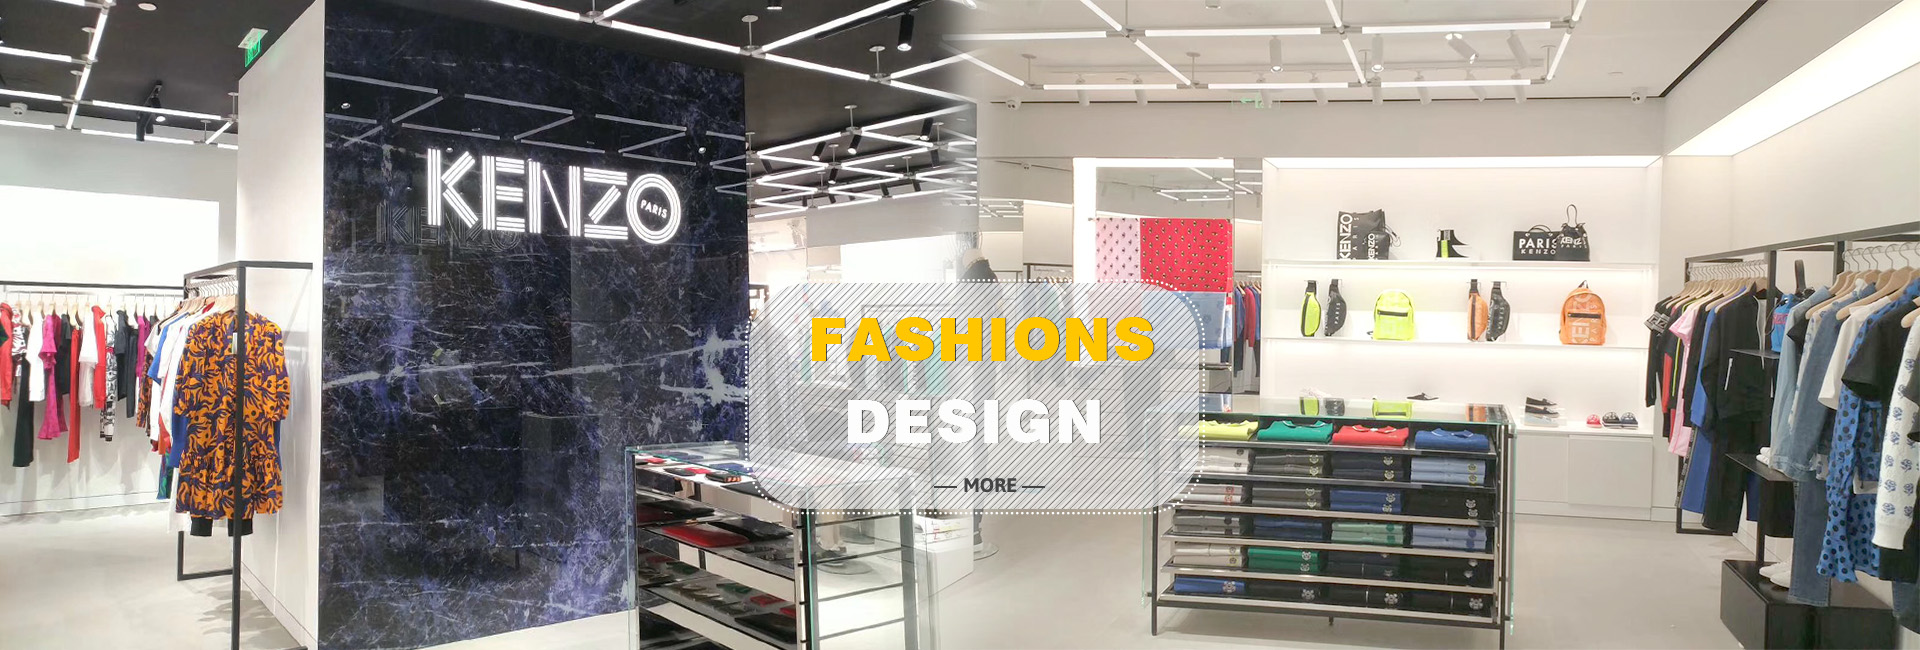 Weilin for Kenzo fixtures fitout